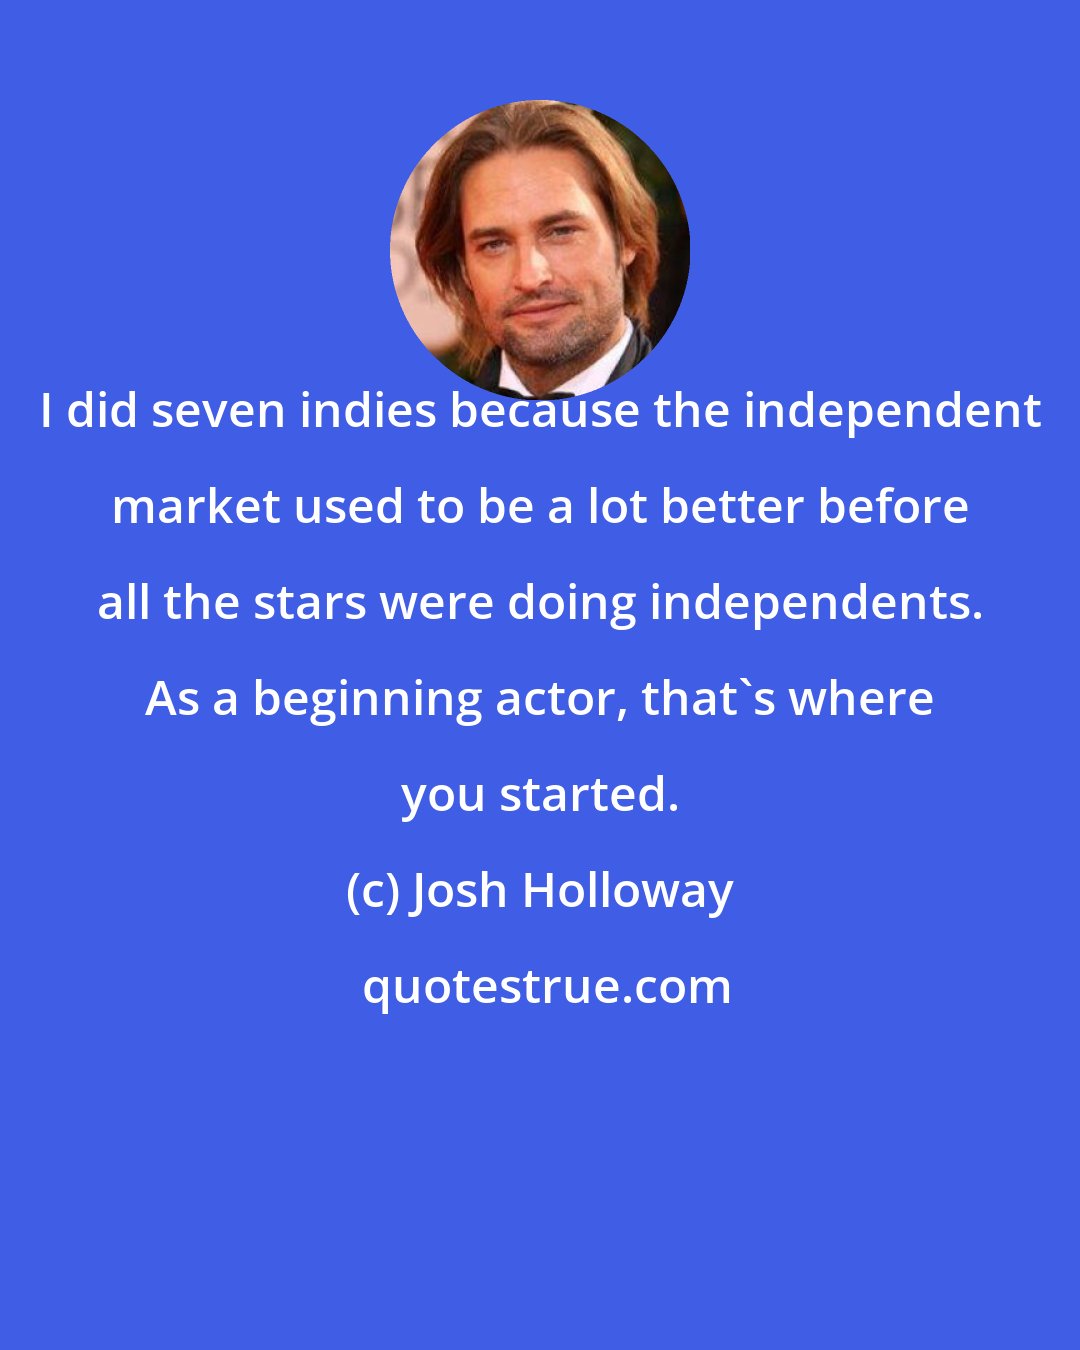 Josh Holloway: I did seven indies because the independent market used to be a lot better before all the stars were doing independents. As a beginning actor, that's where you started.